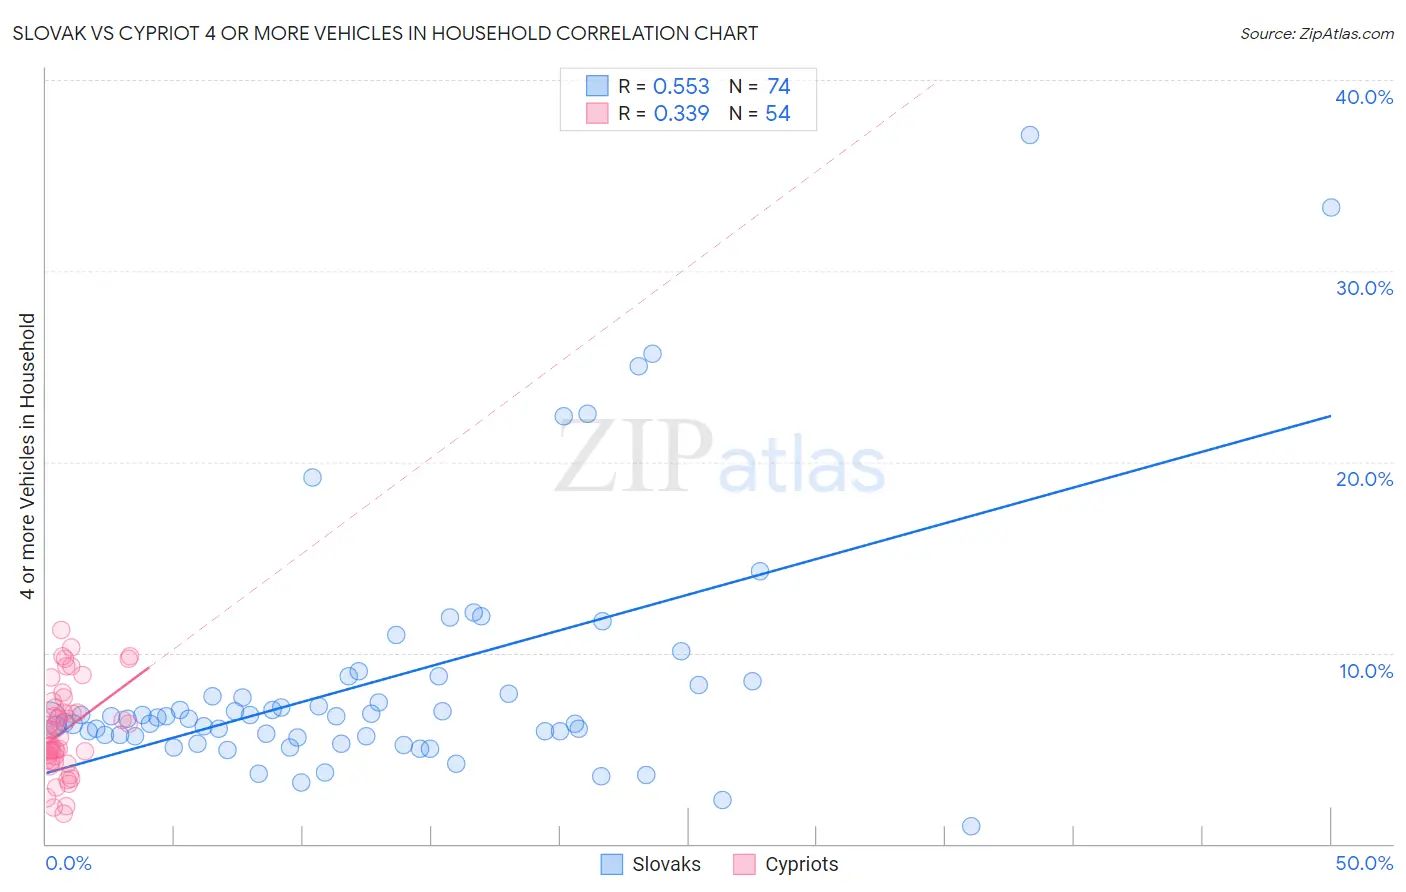 Slovak vs Cypriot 4 or more Vehicles in Household